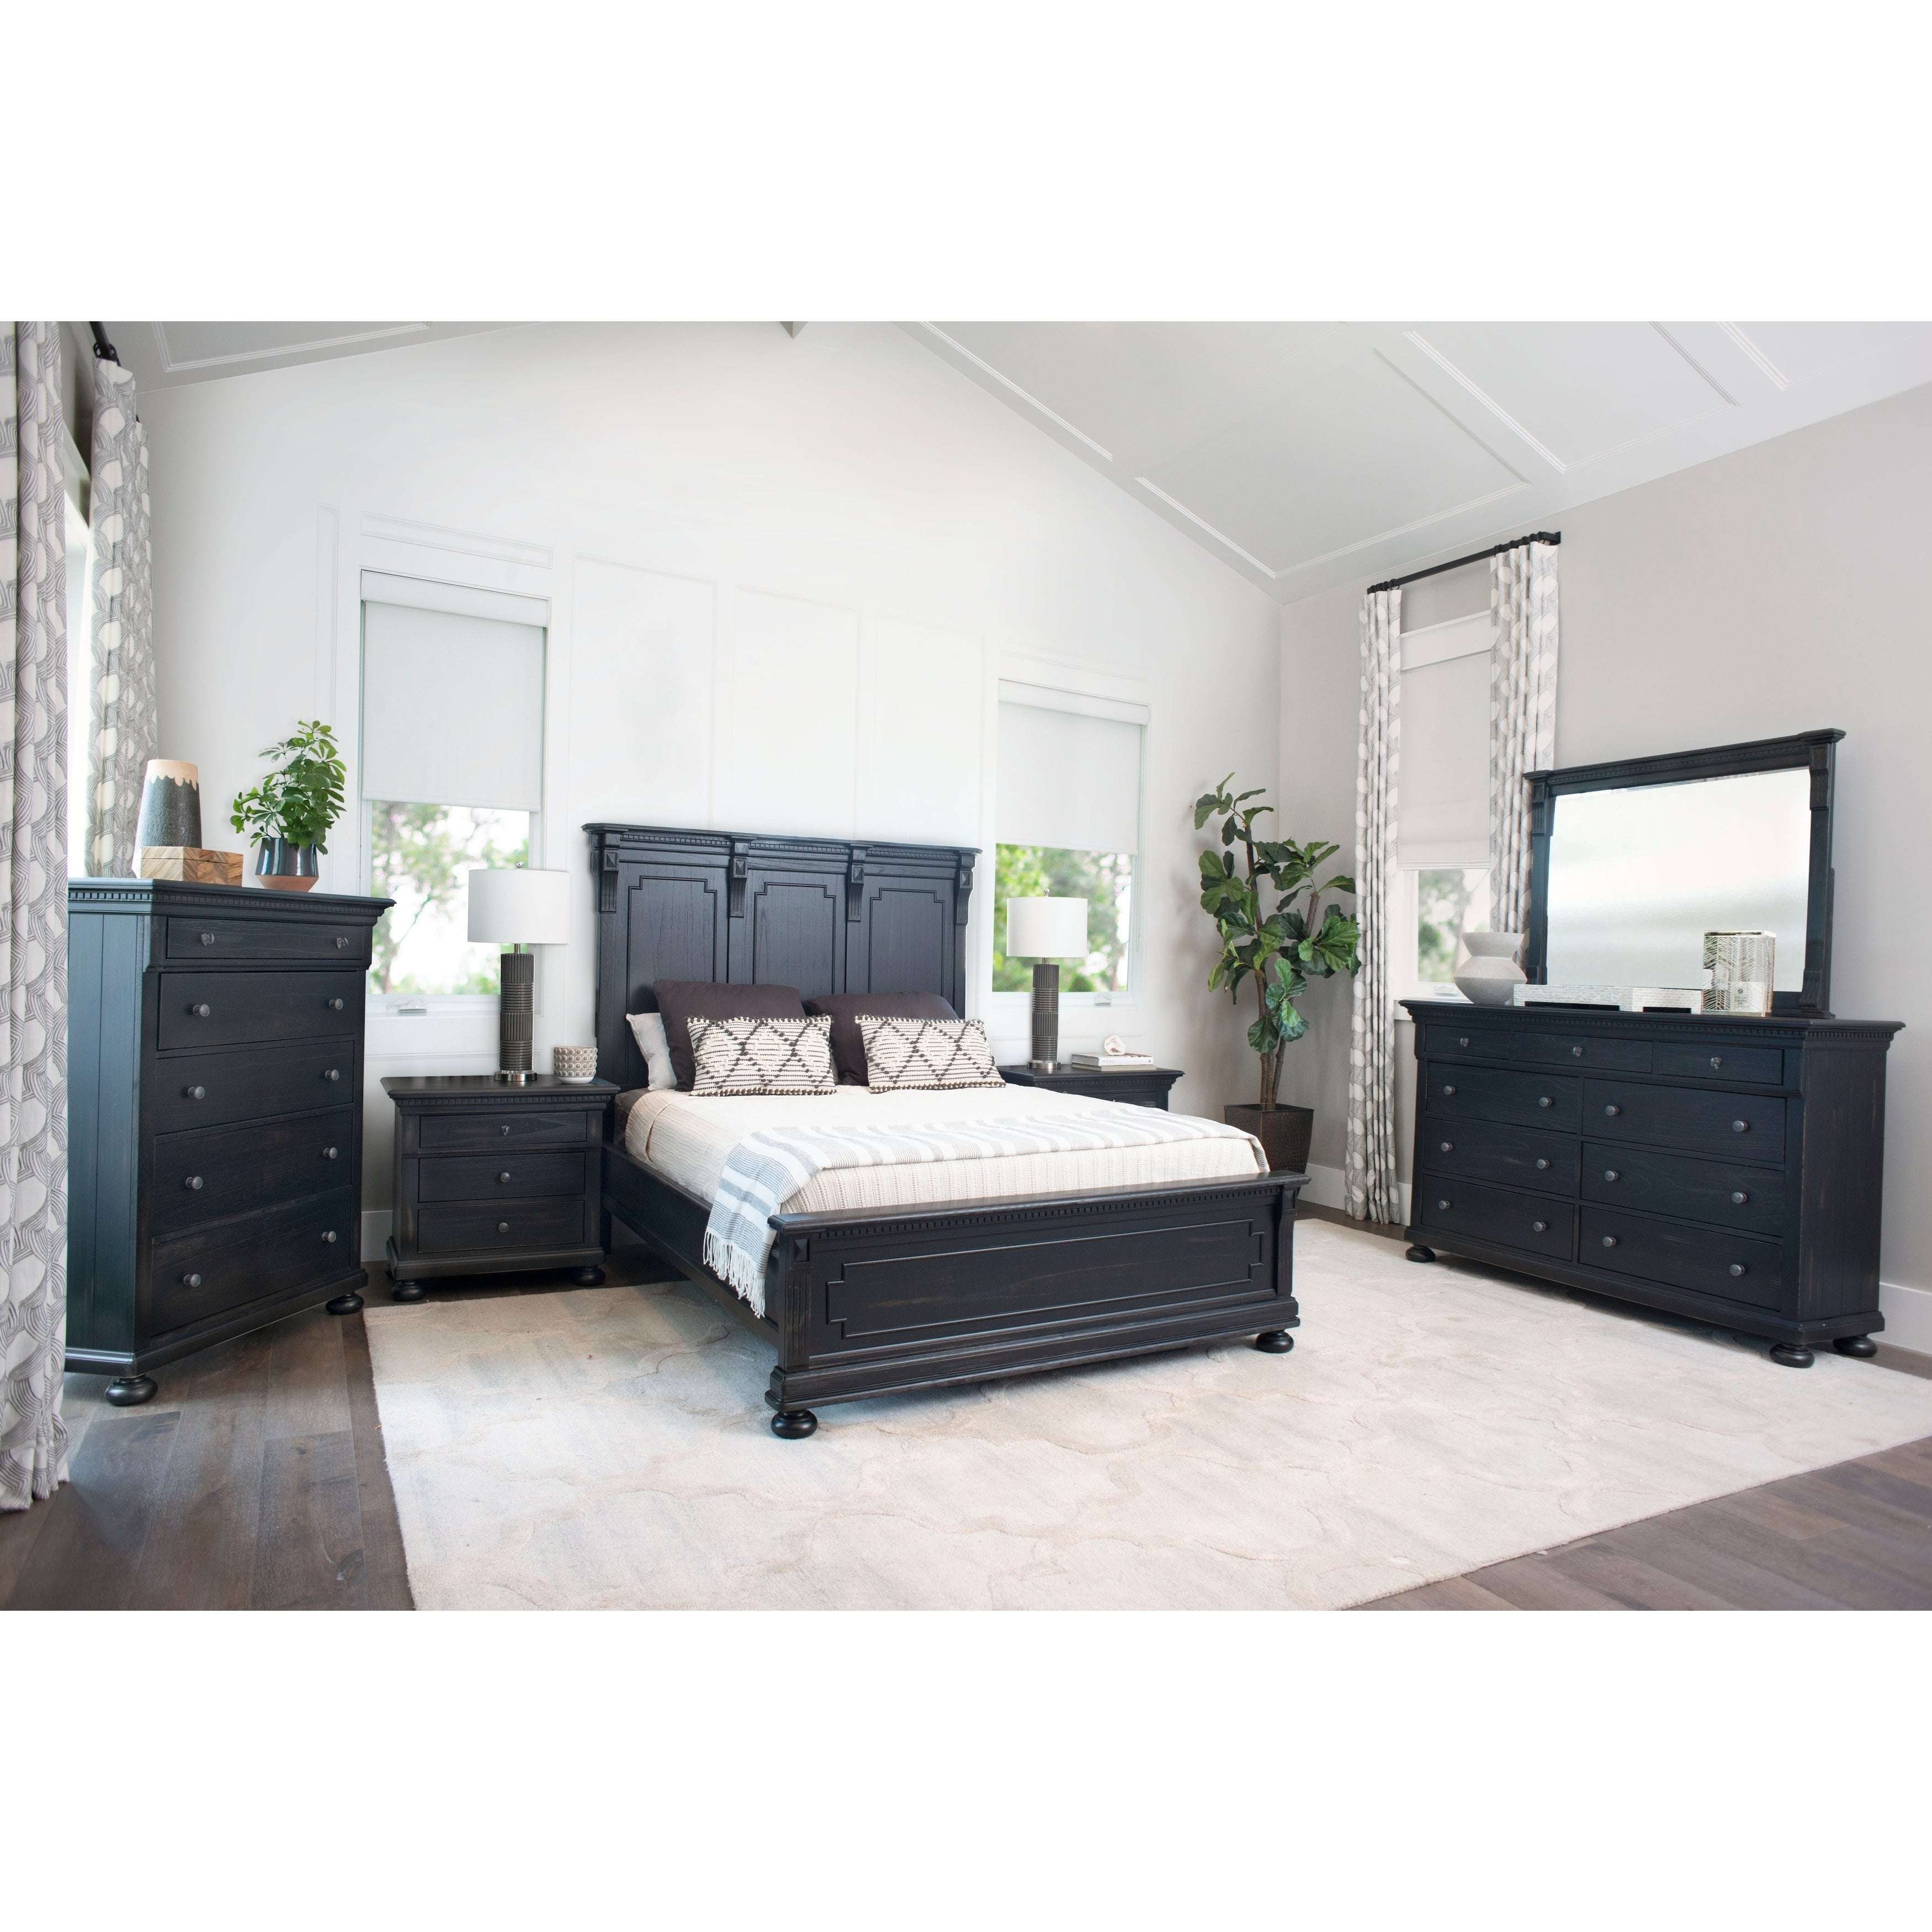 Abson Hendrick Distressed Black Wood 6 Piece Bedroom Set throughout dimensions 3500 X 3500